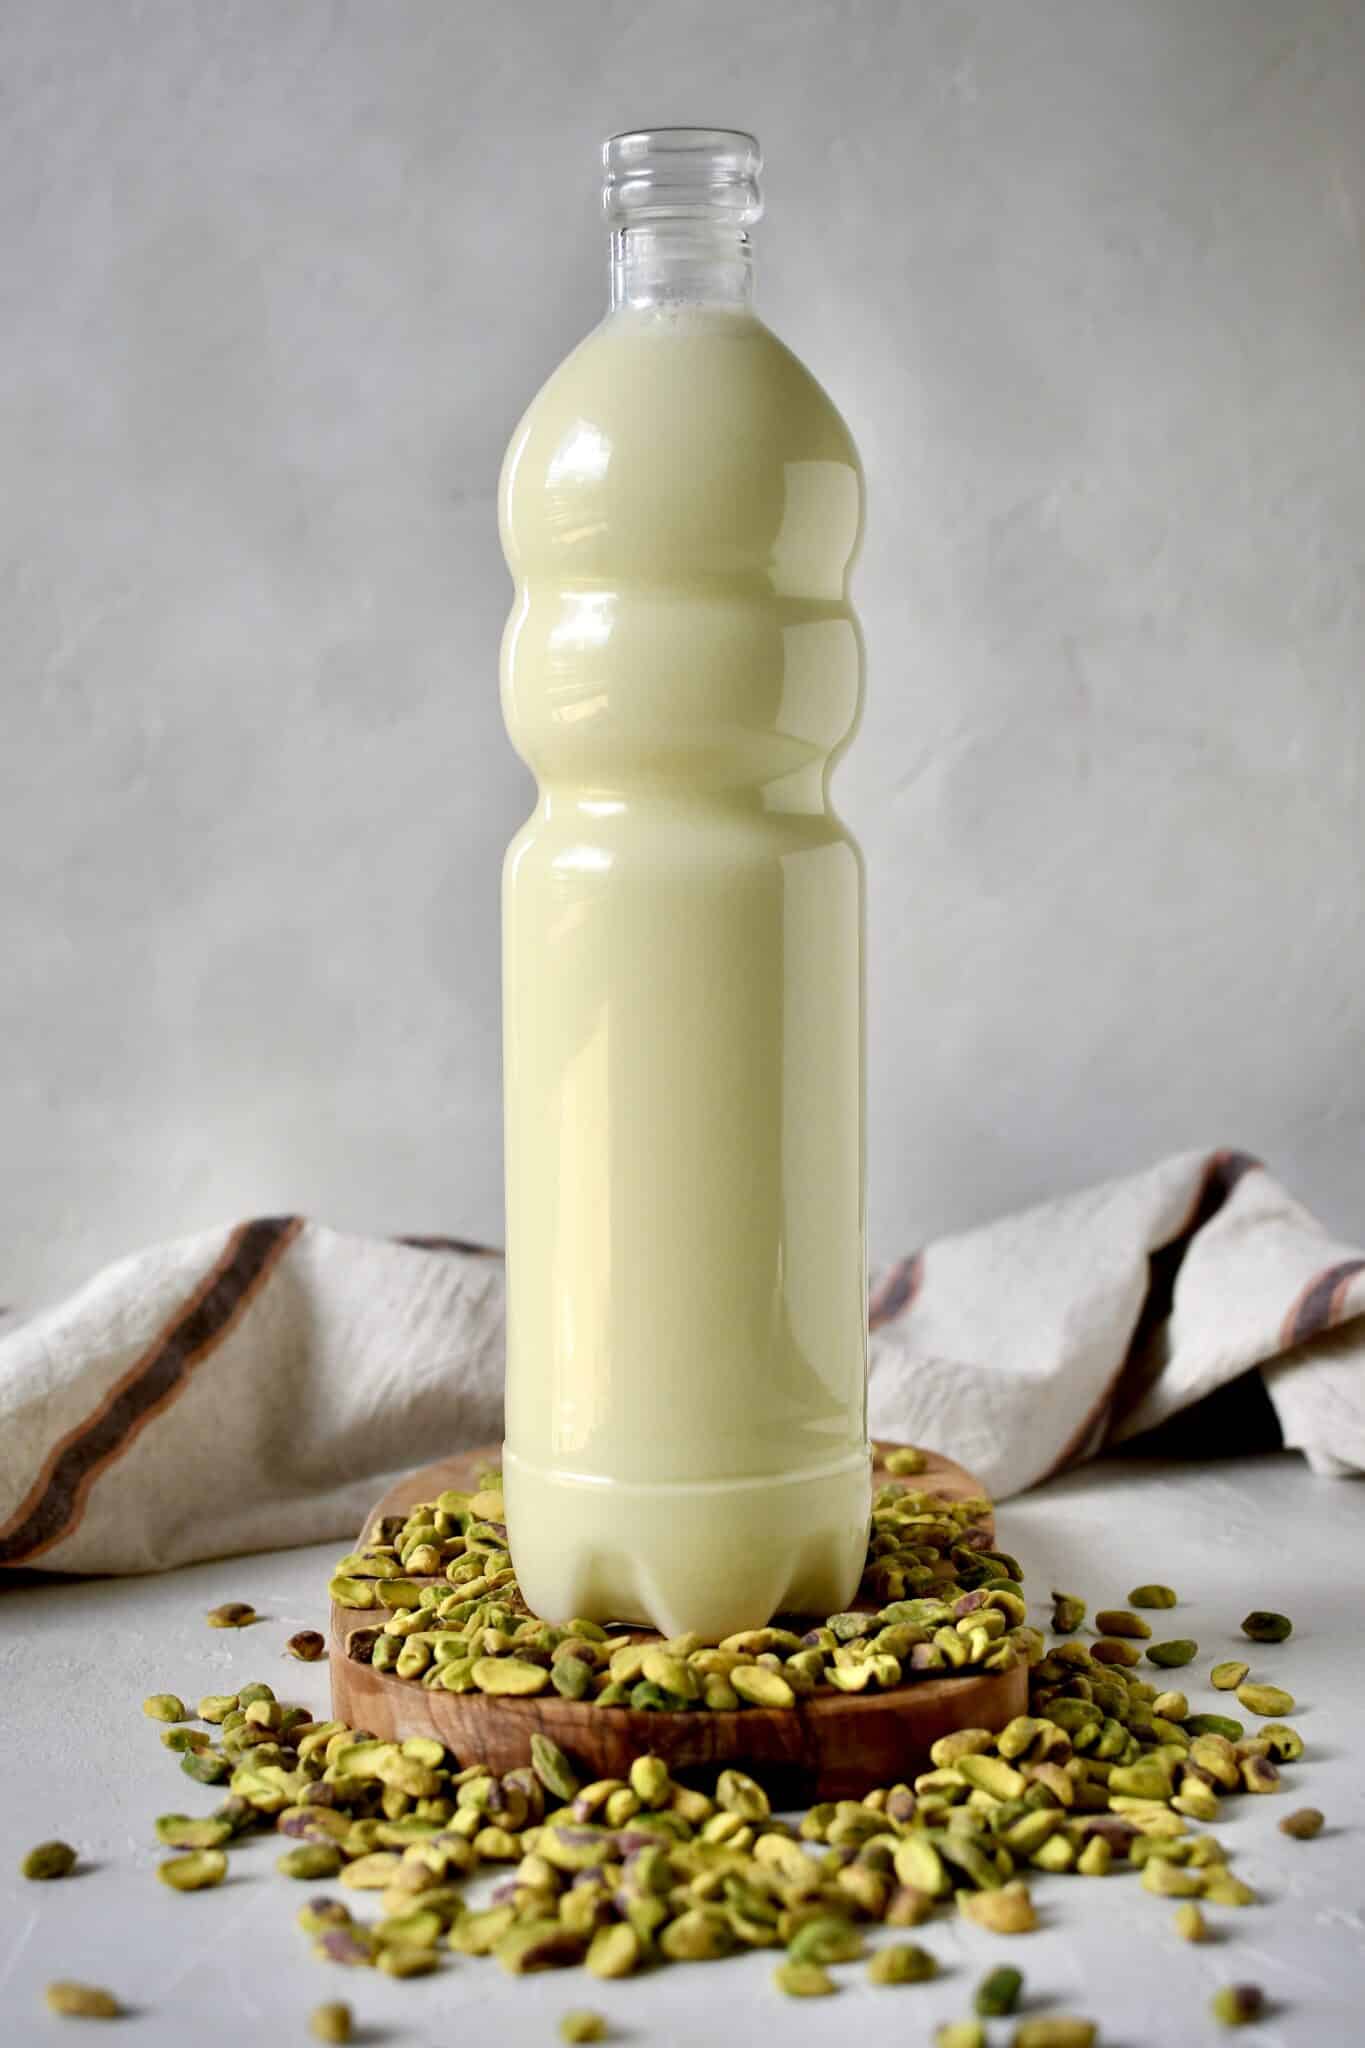 Finished pistachio milk in a glass jar ready to drink.